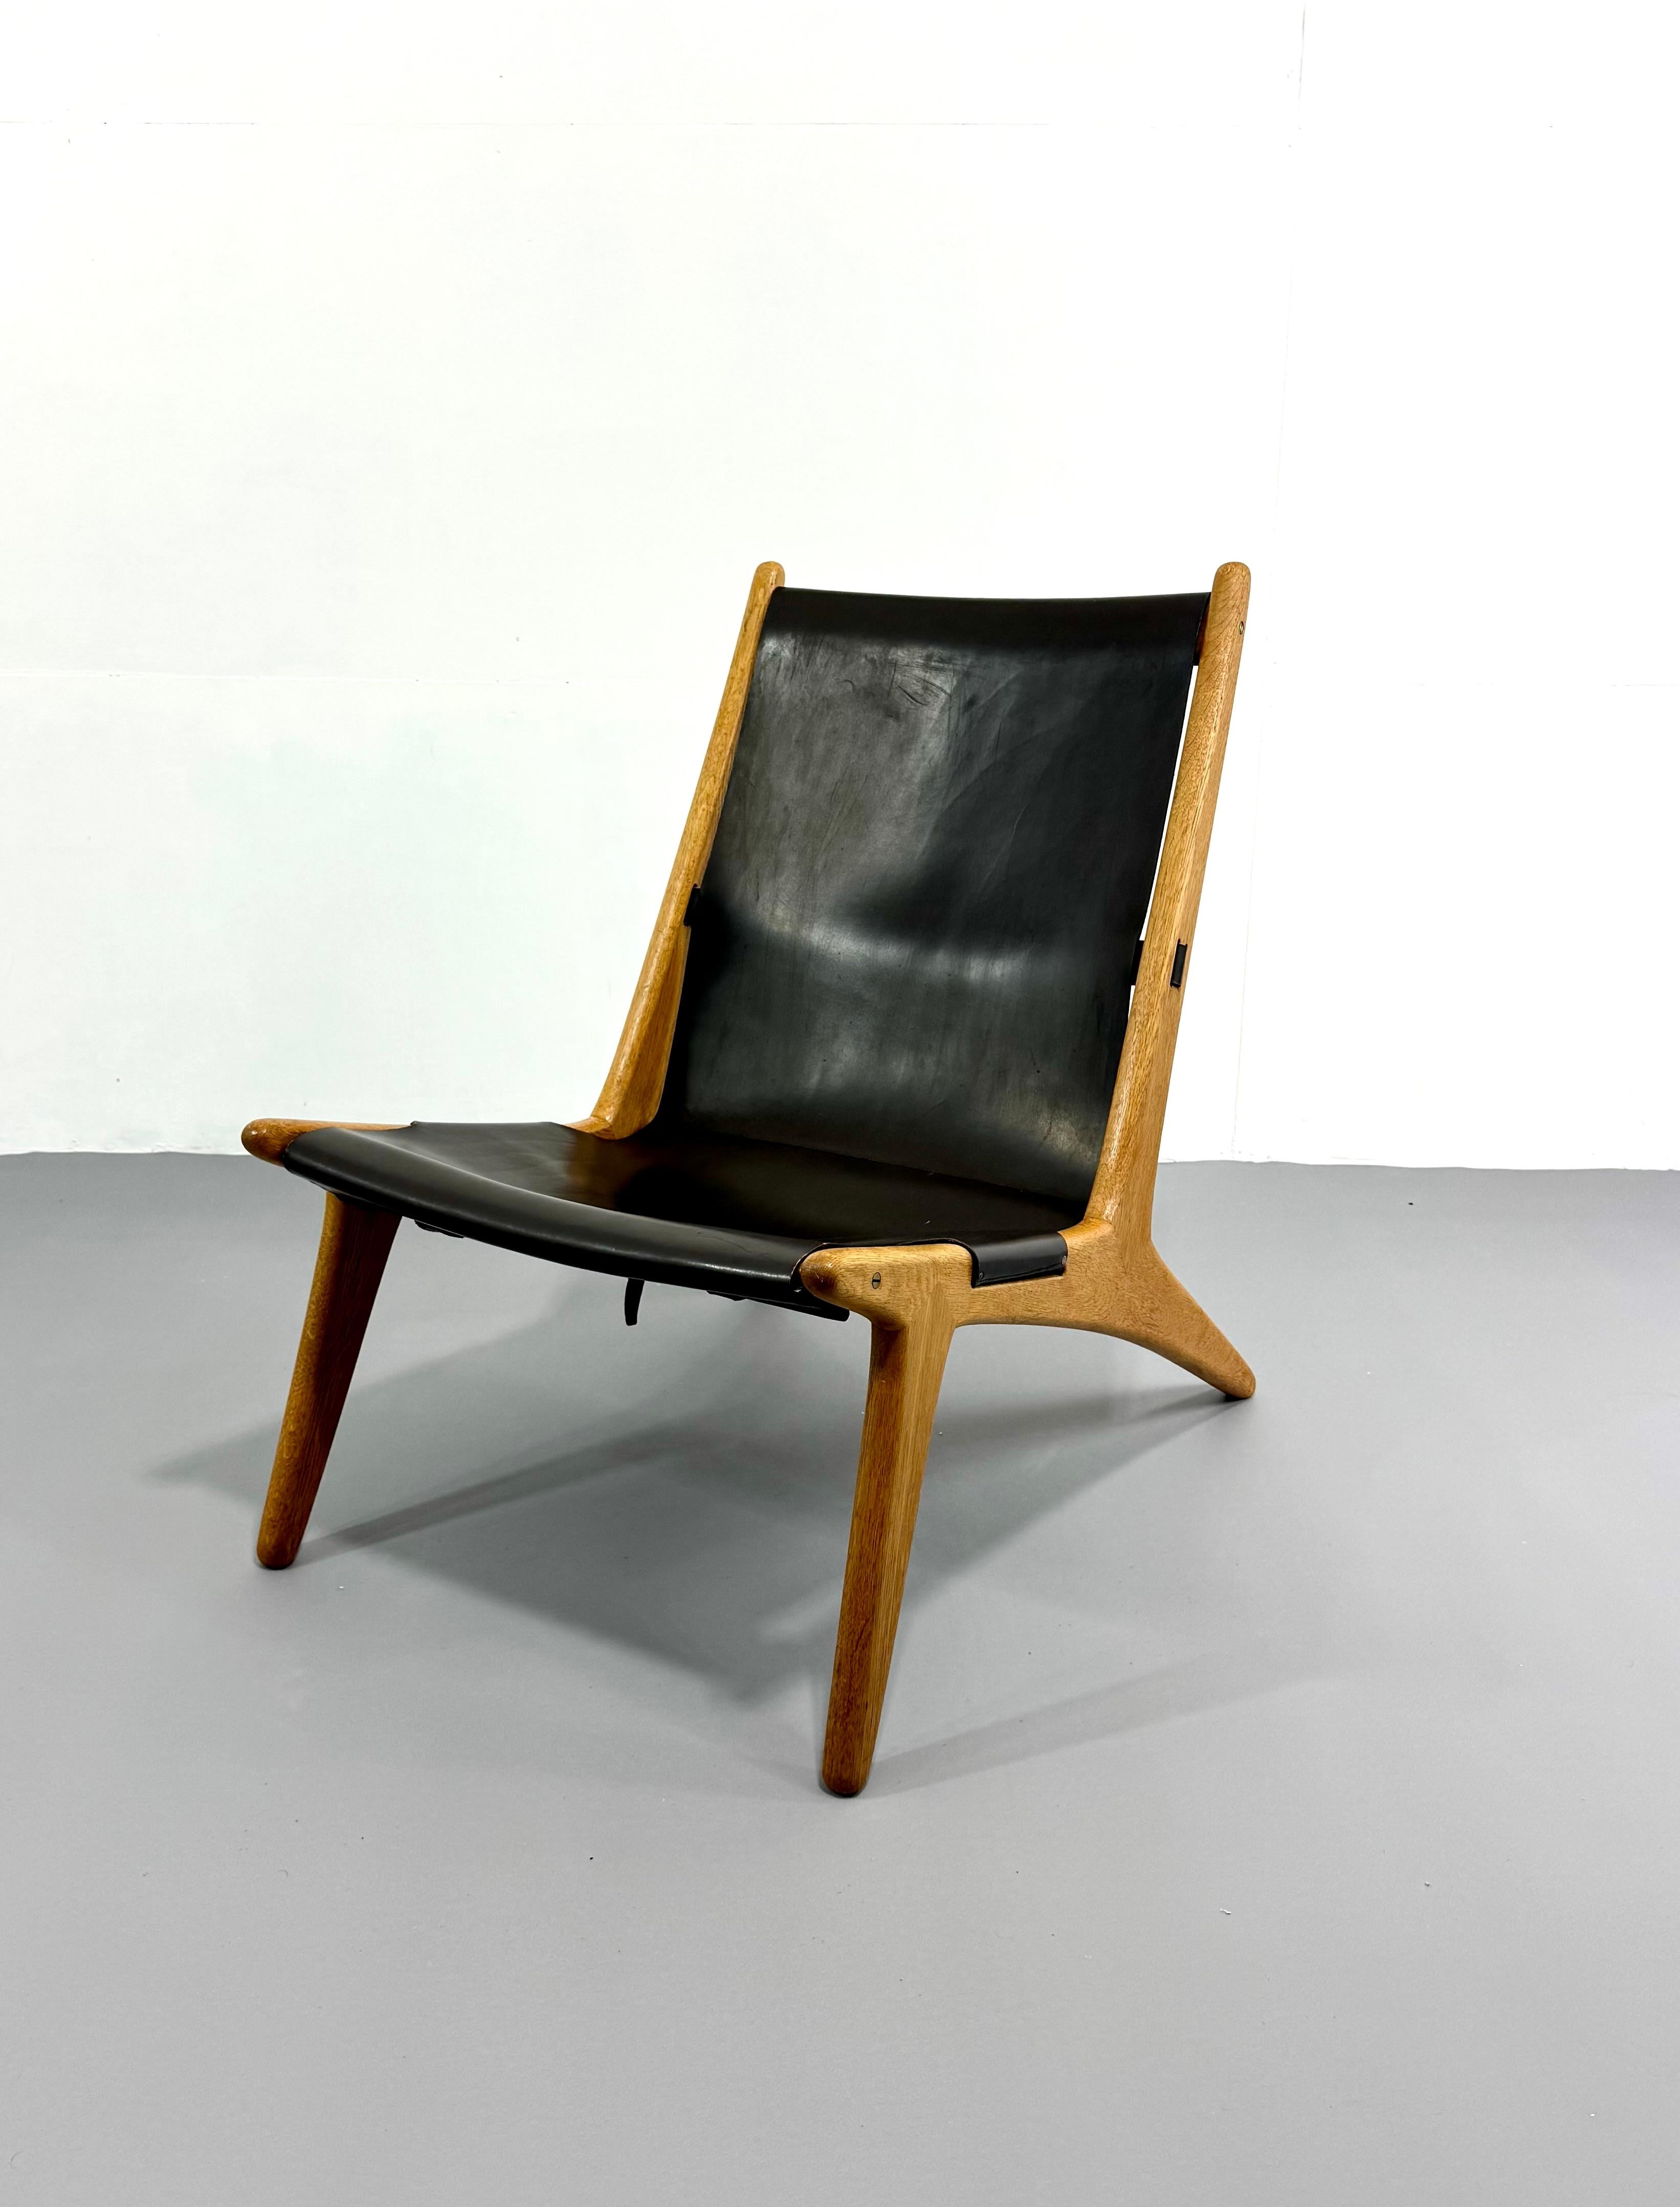 This striking lounge chair was designed by Uno and Östen Kristiansson and manufactured by Luxus AB in Vittsjö, Sweden from 1954 onwards. The design of this model numbered 204 is often referred to as a hunting chair. The frame is made of solid oak